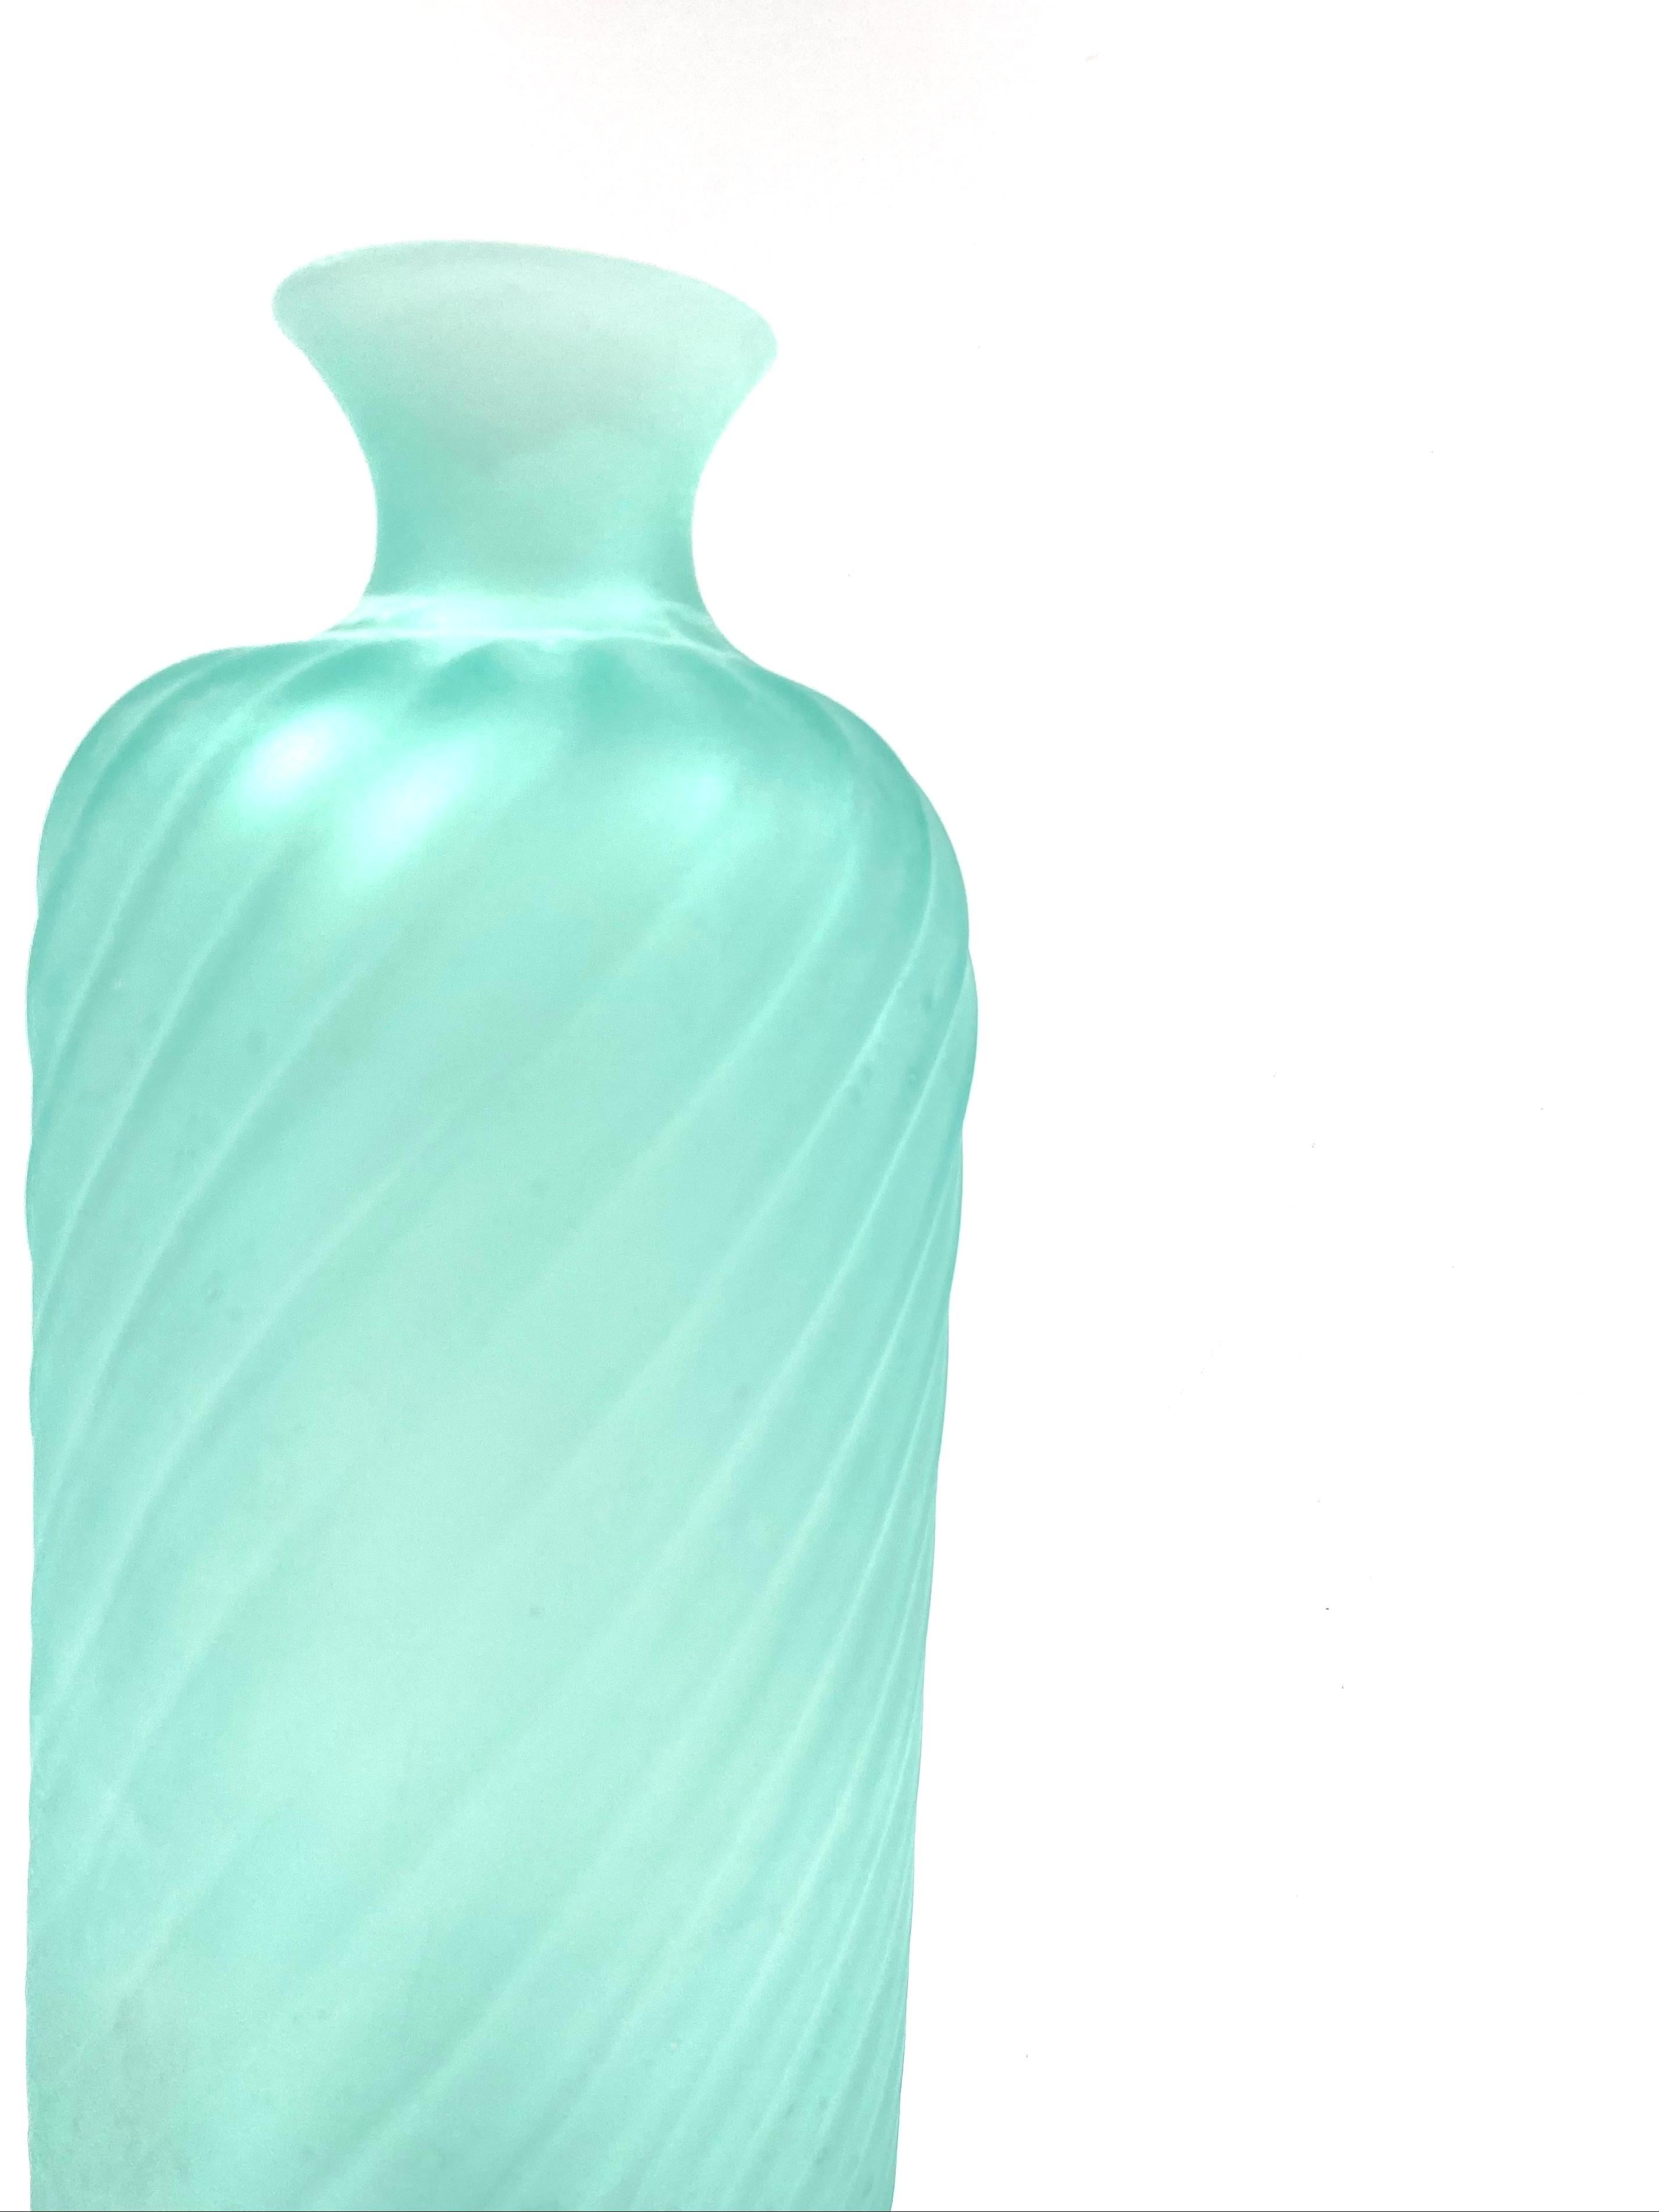 Late 20th Century Gino Cenedese, Murano Frosted Glass Aqua Green Vase, Cenedese, Murano Italy 1970 For Sale